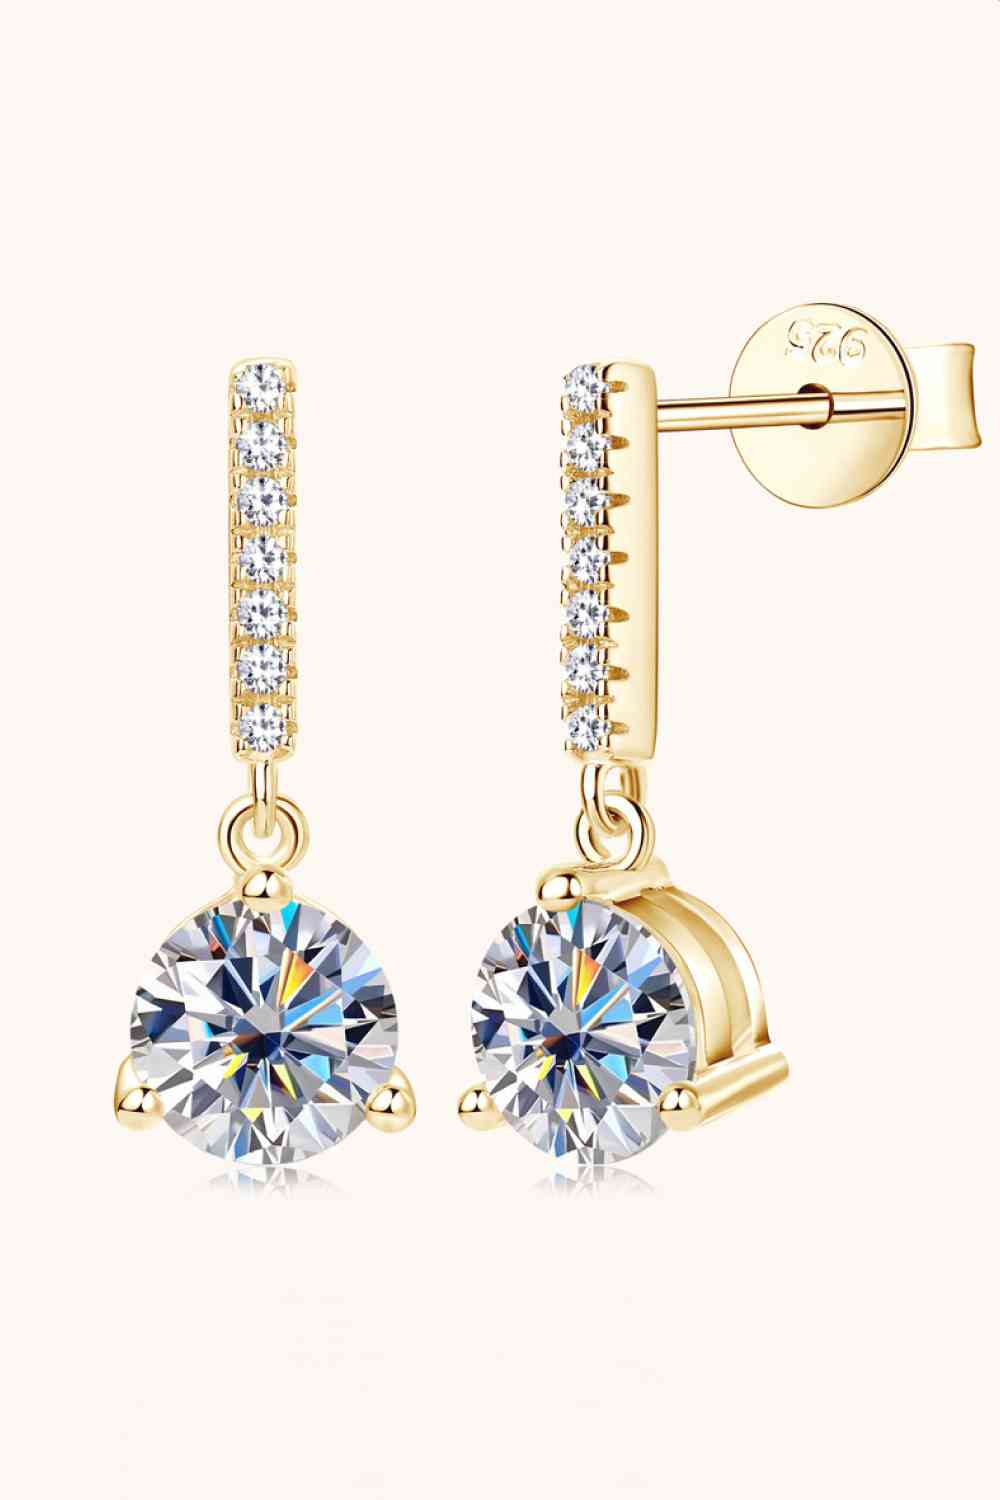 a pair of gold tone earrings with clear crystal stones